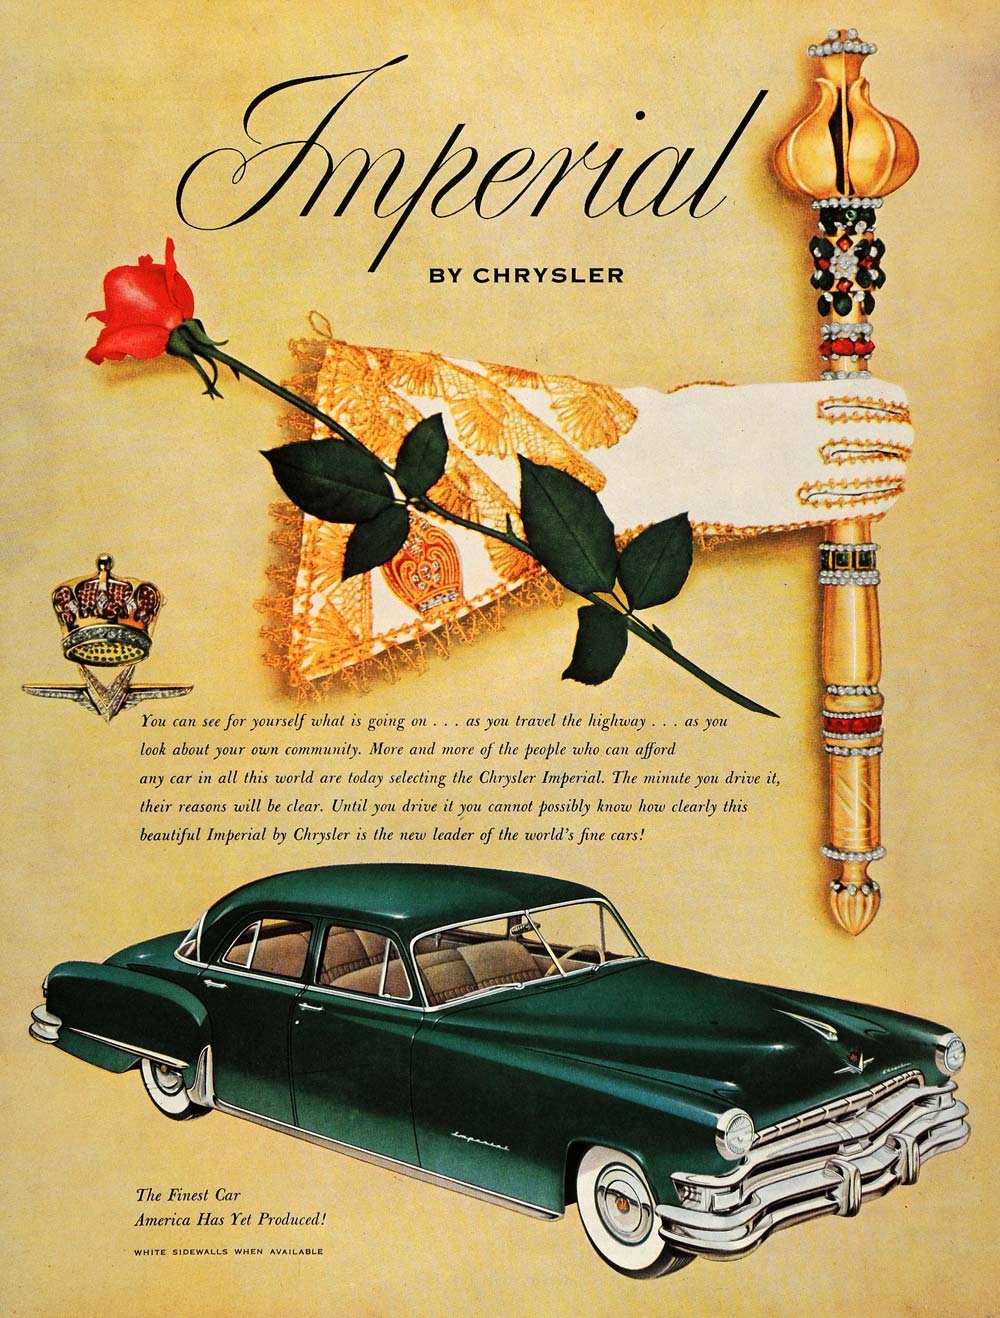 1952 Ad Green Imperial Chrysler Automobile Rose Wand - ORIGINAL ADVERTISING HDL1